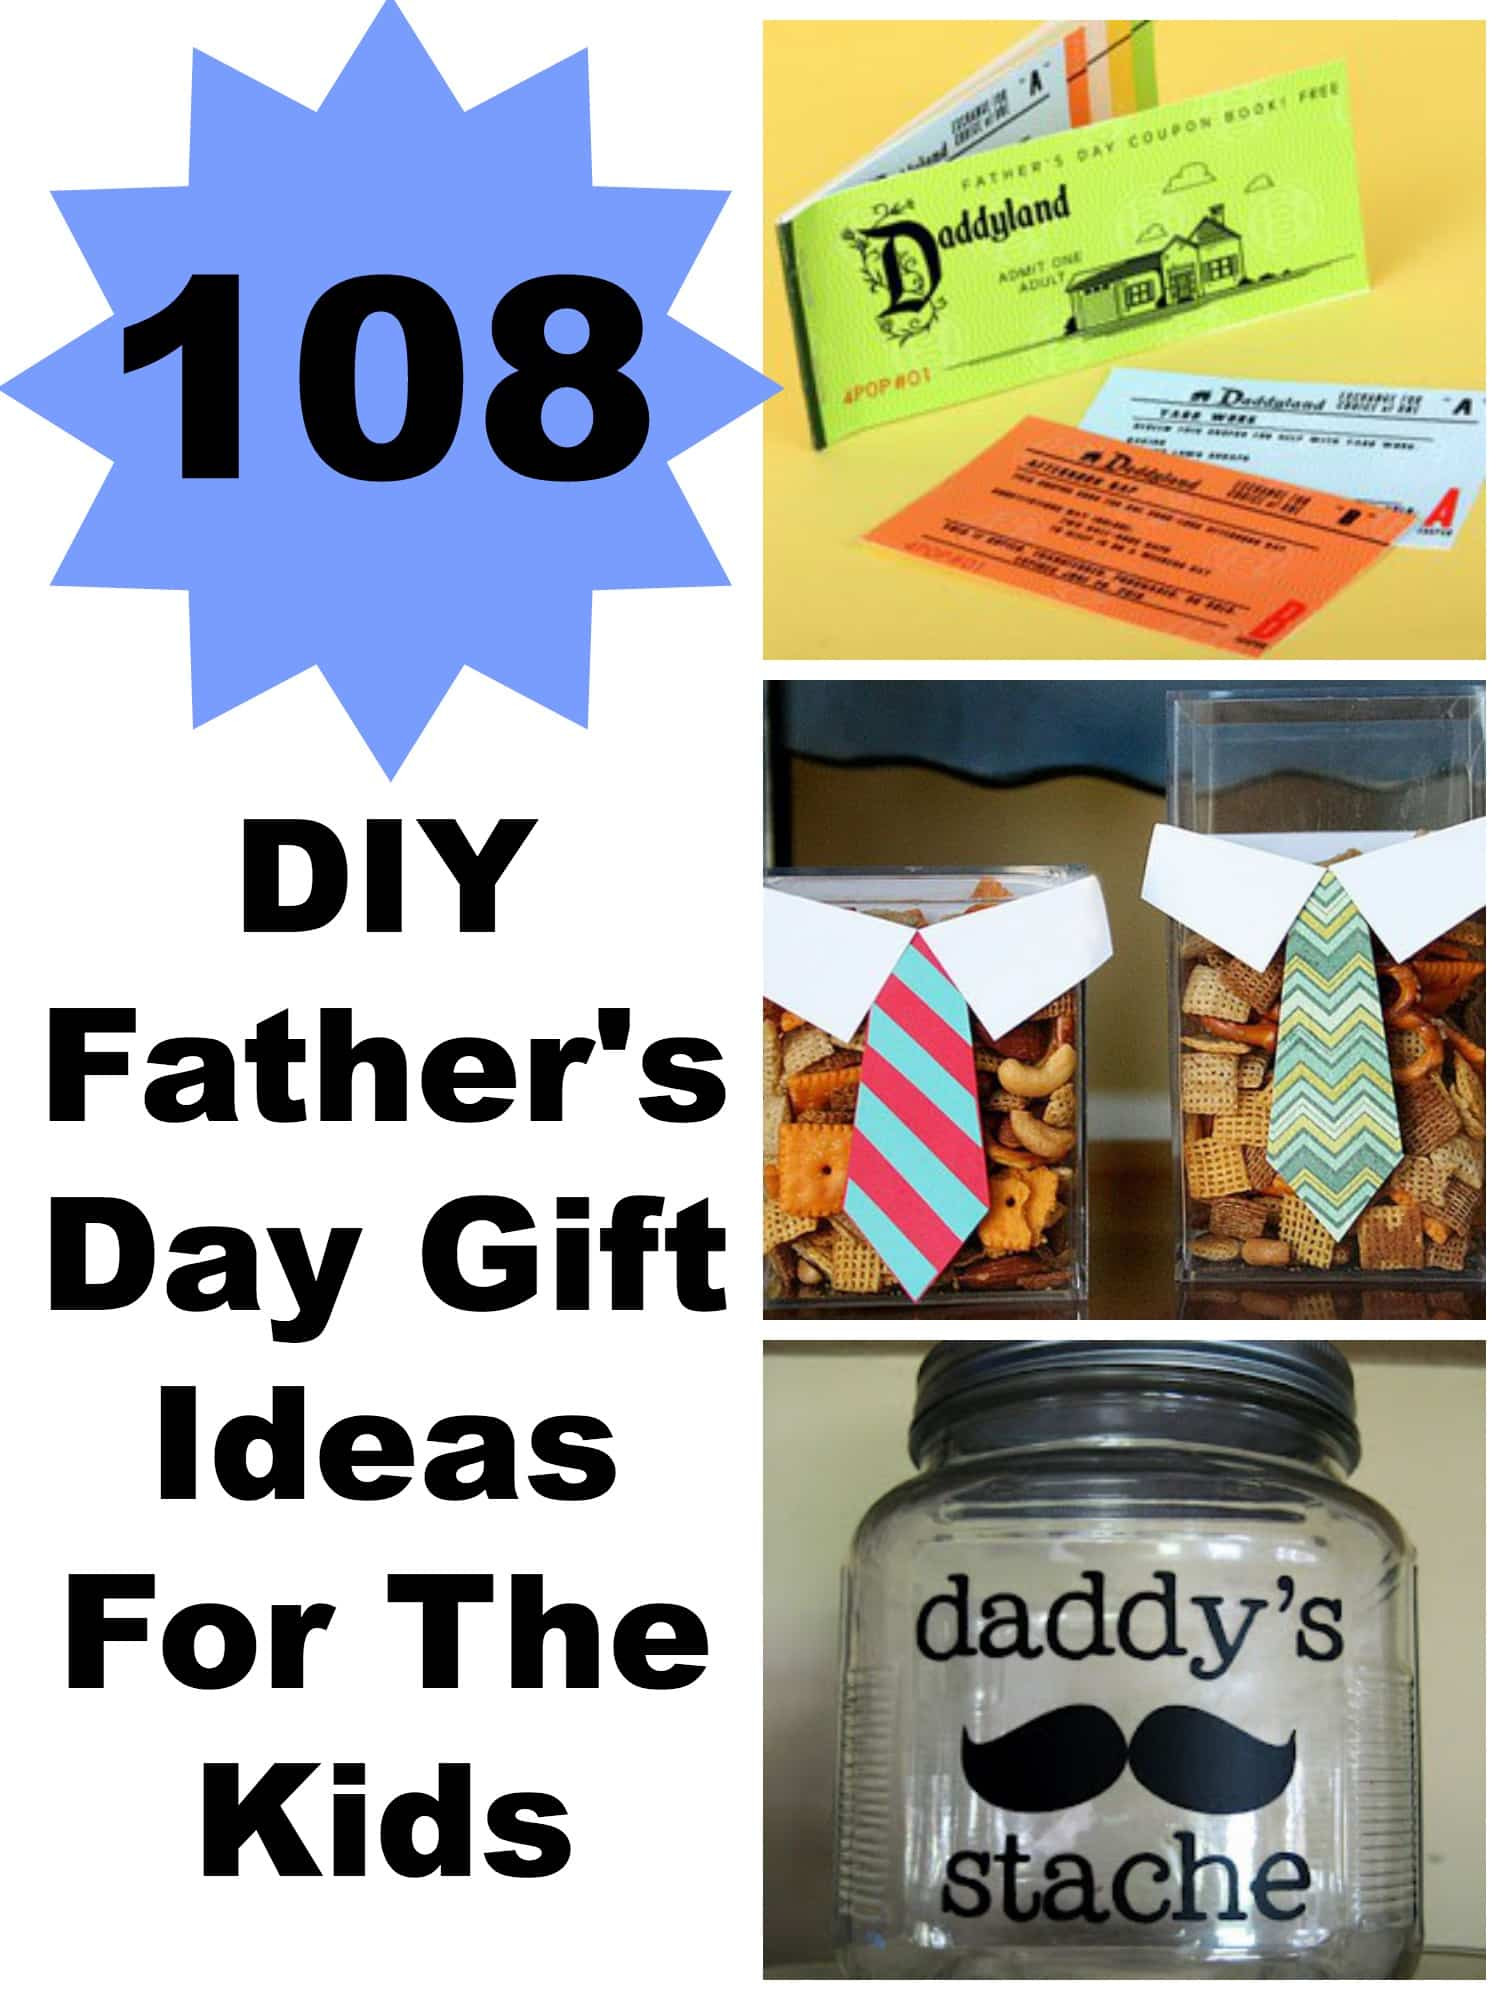 Diy Father'S Day Gift Ideas From Daughter
 108 DIY Father s Day Gift Ideas For The Kids Lady and